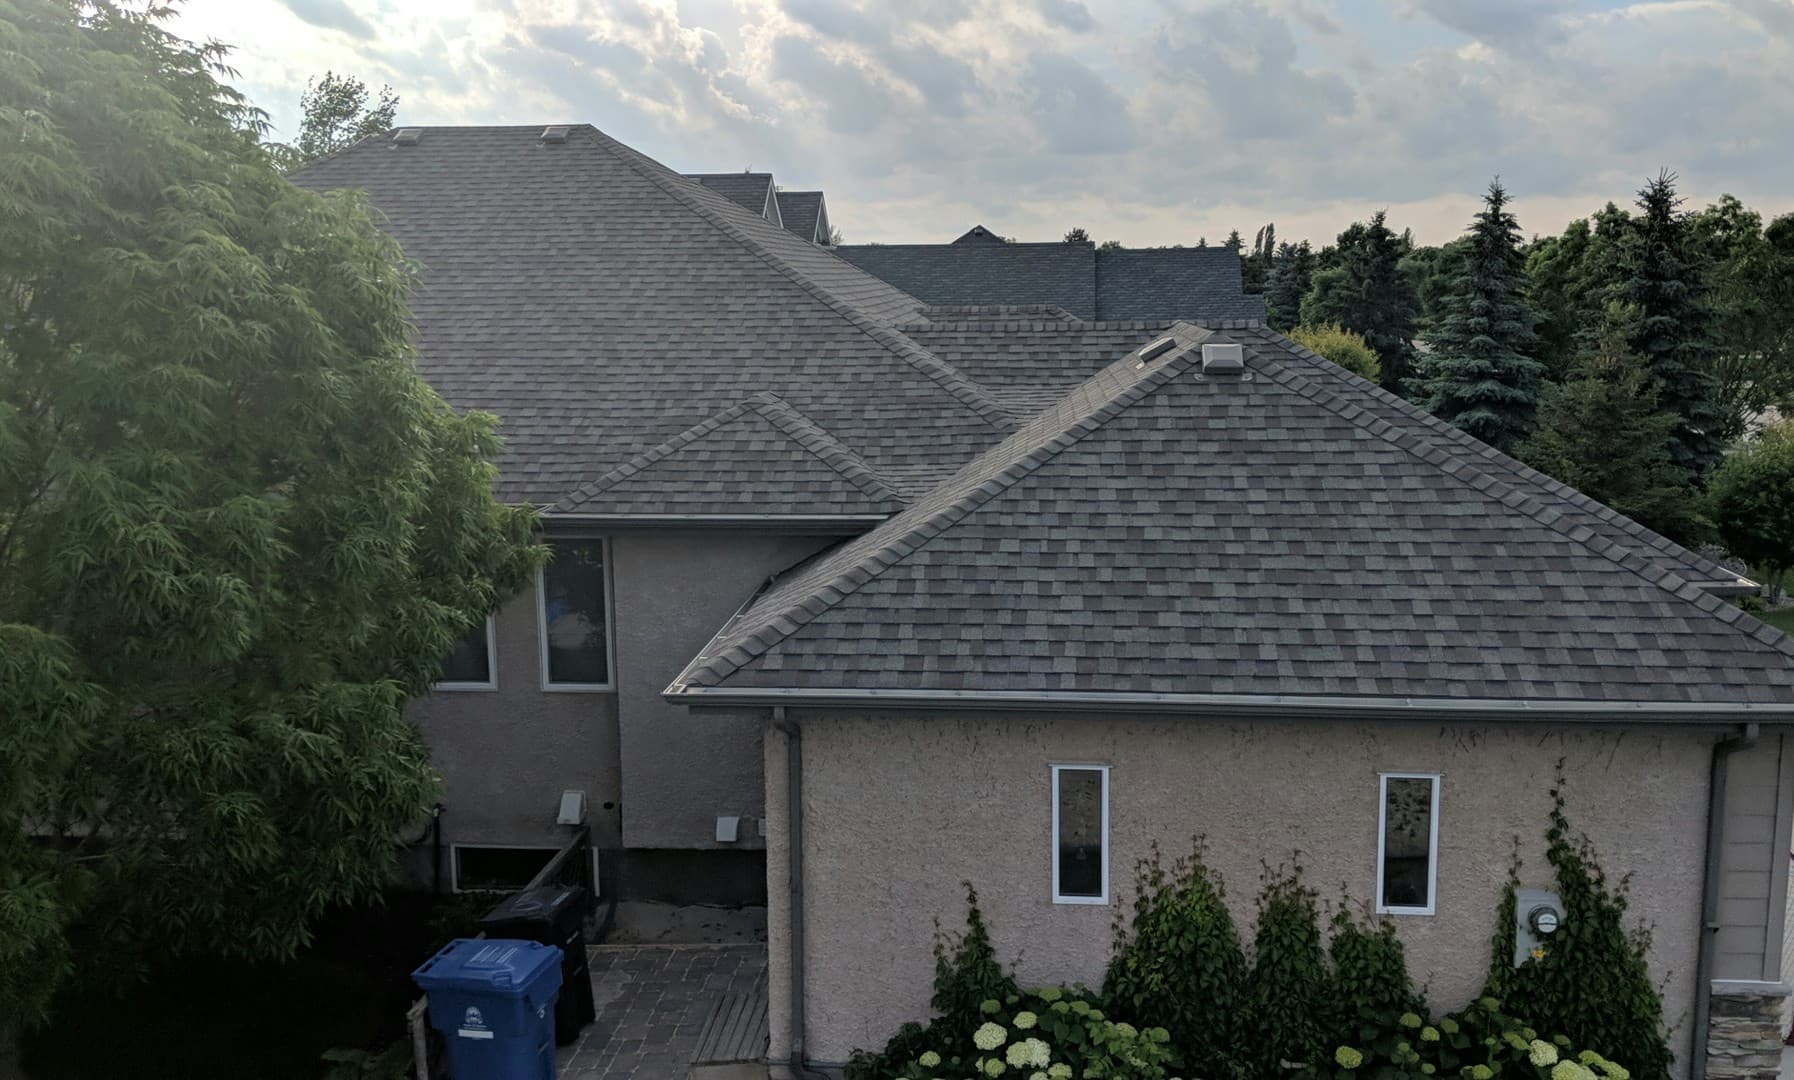 New roofing